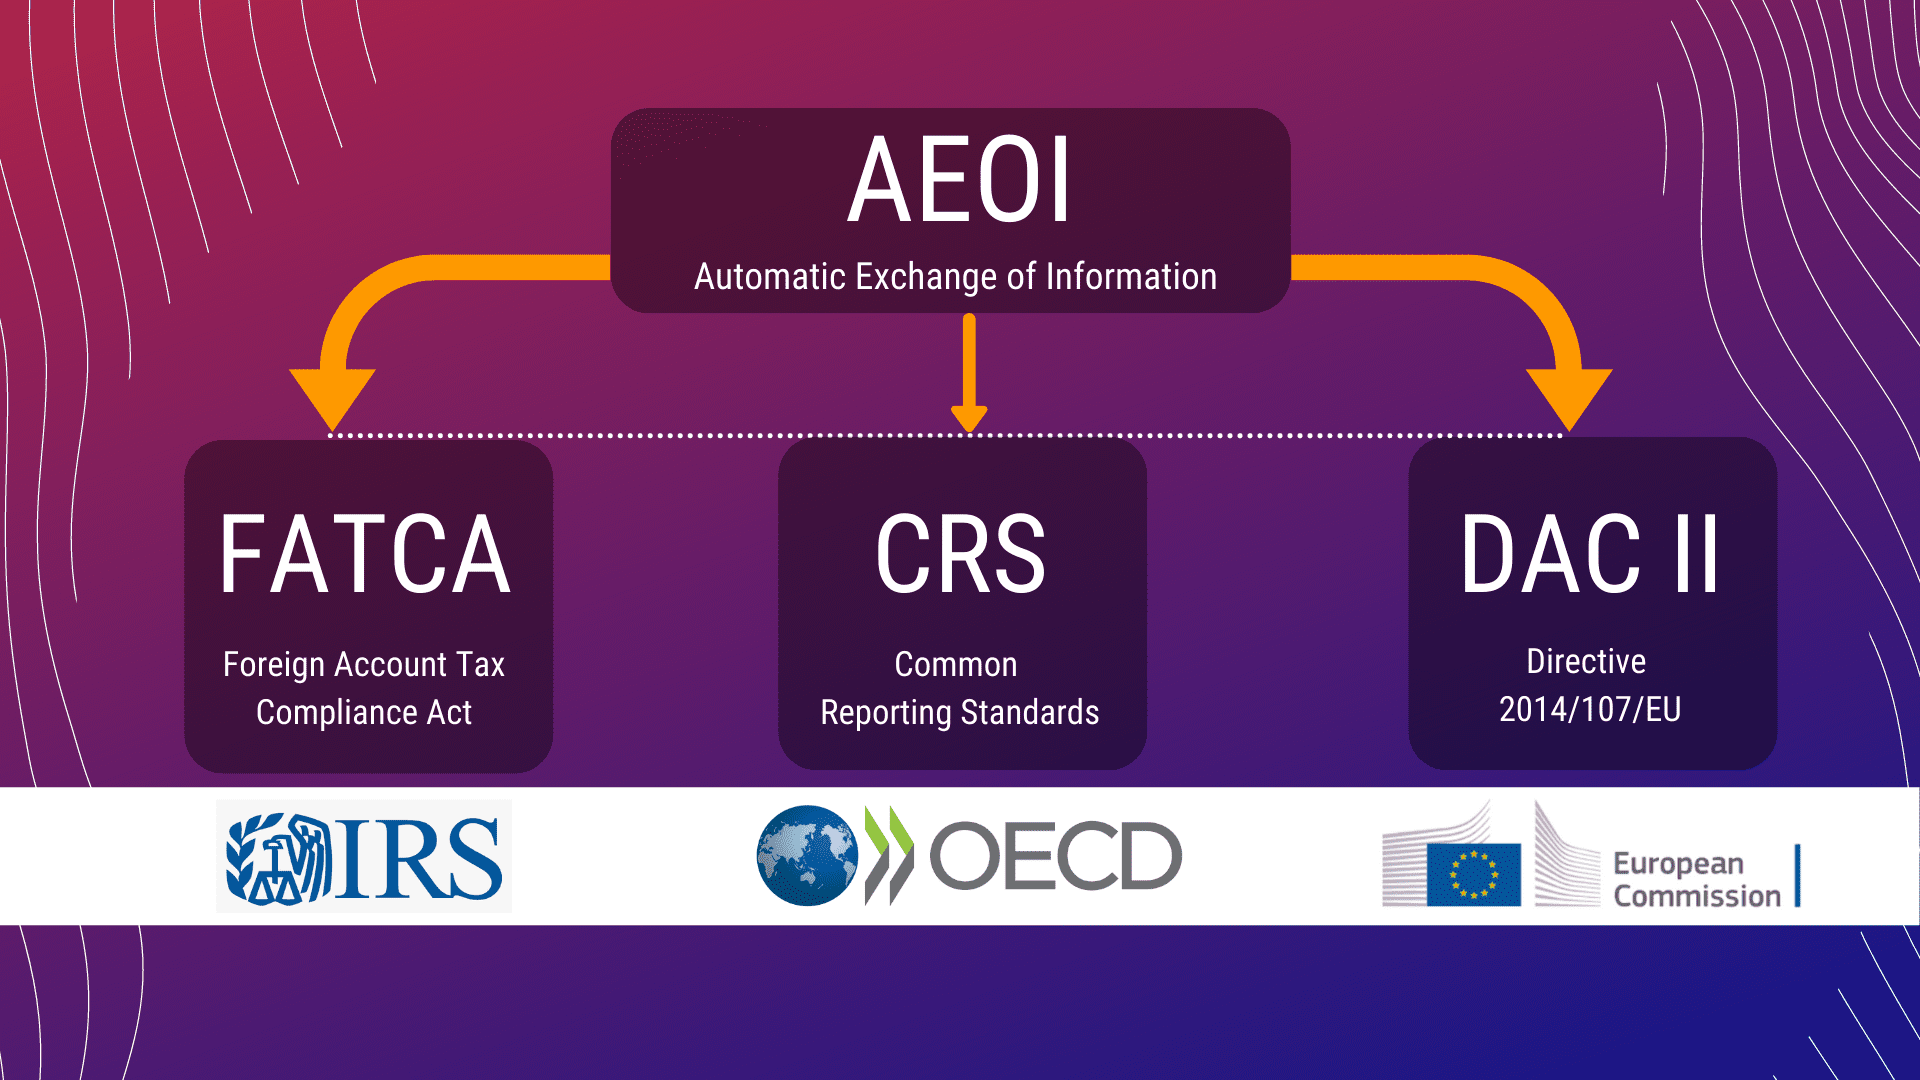 How is AEoI Different from FATCA and CRS?